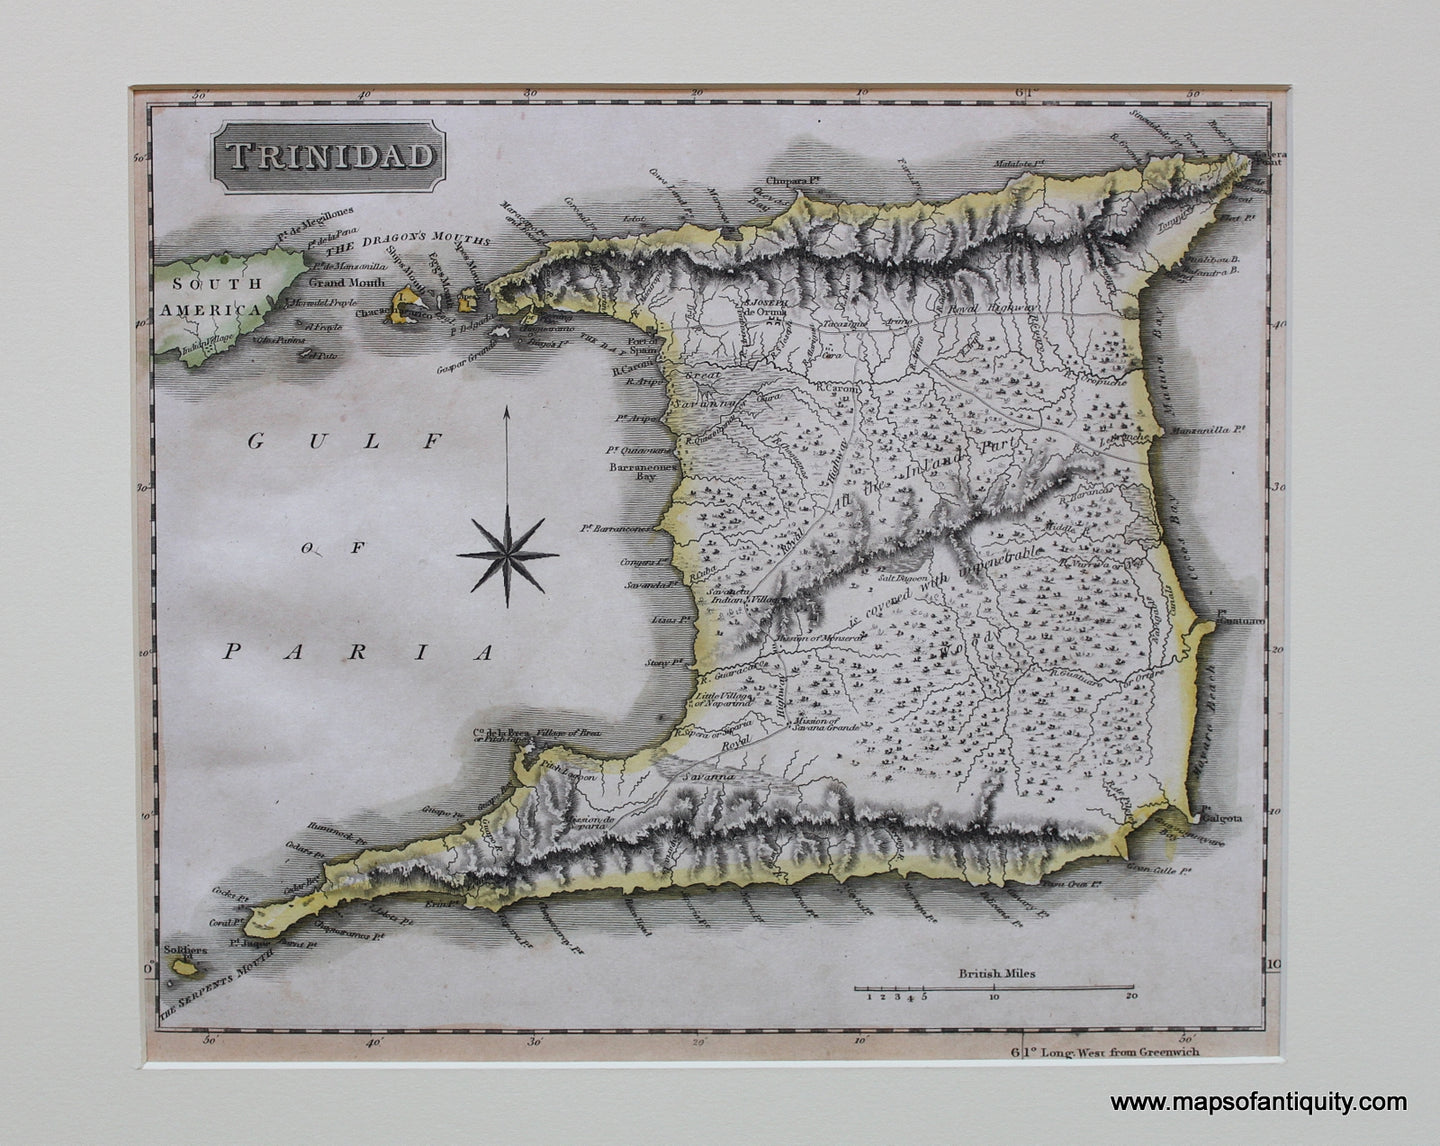 Antique-Hand-Colored-Map-Trinidad**********-West-Indies--1816-Thomson-Maps-Of-Antiquity